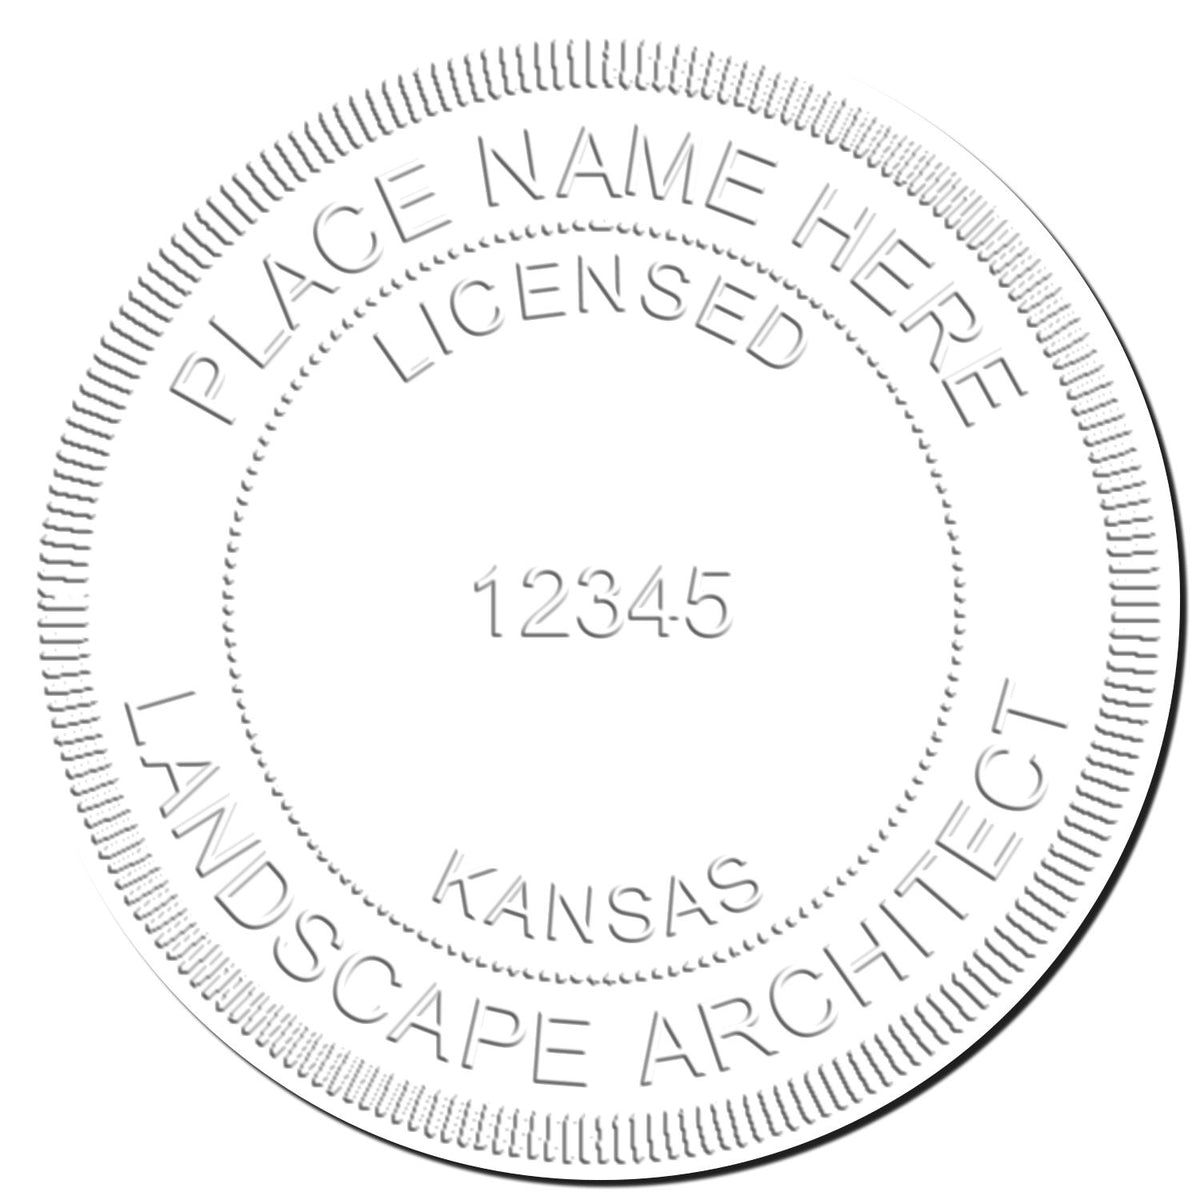 This paper is stamped with a sample imprint of the Gift Kansas Landscape Architect Seal, signifying its quality and reliability.